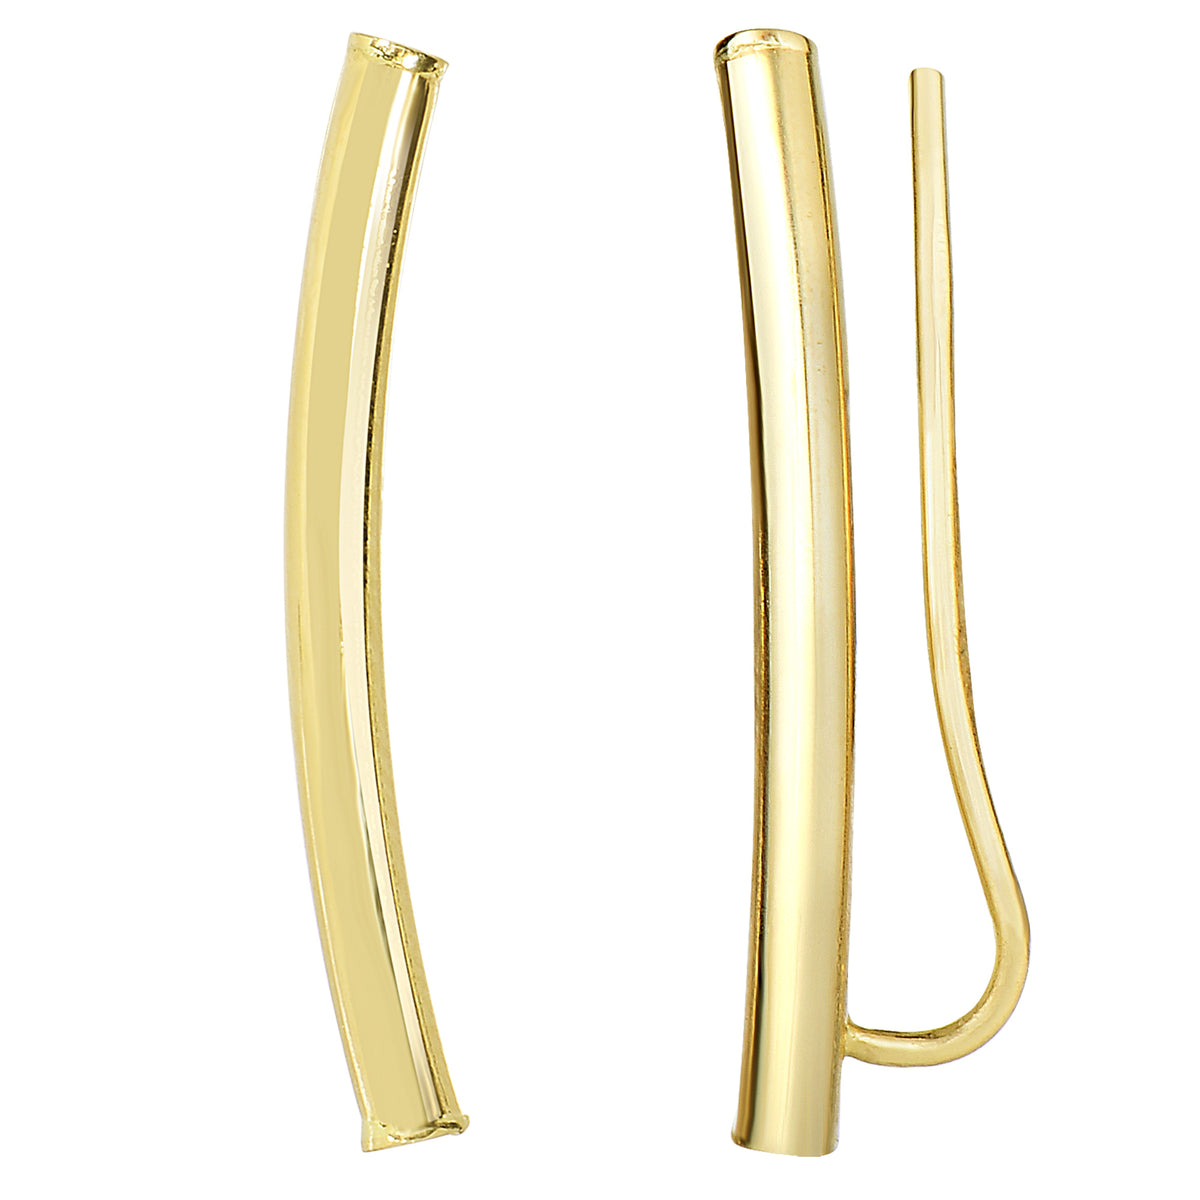 14k Gold Shinny Round Tube Curved Climber Earrings fine designer jewelry for men and women